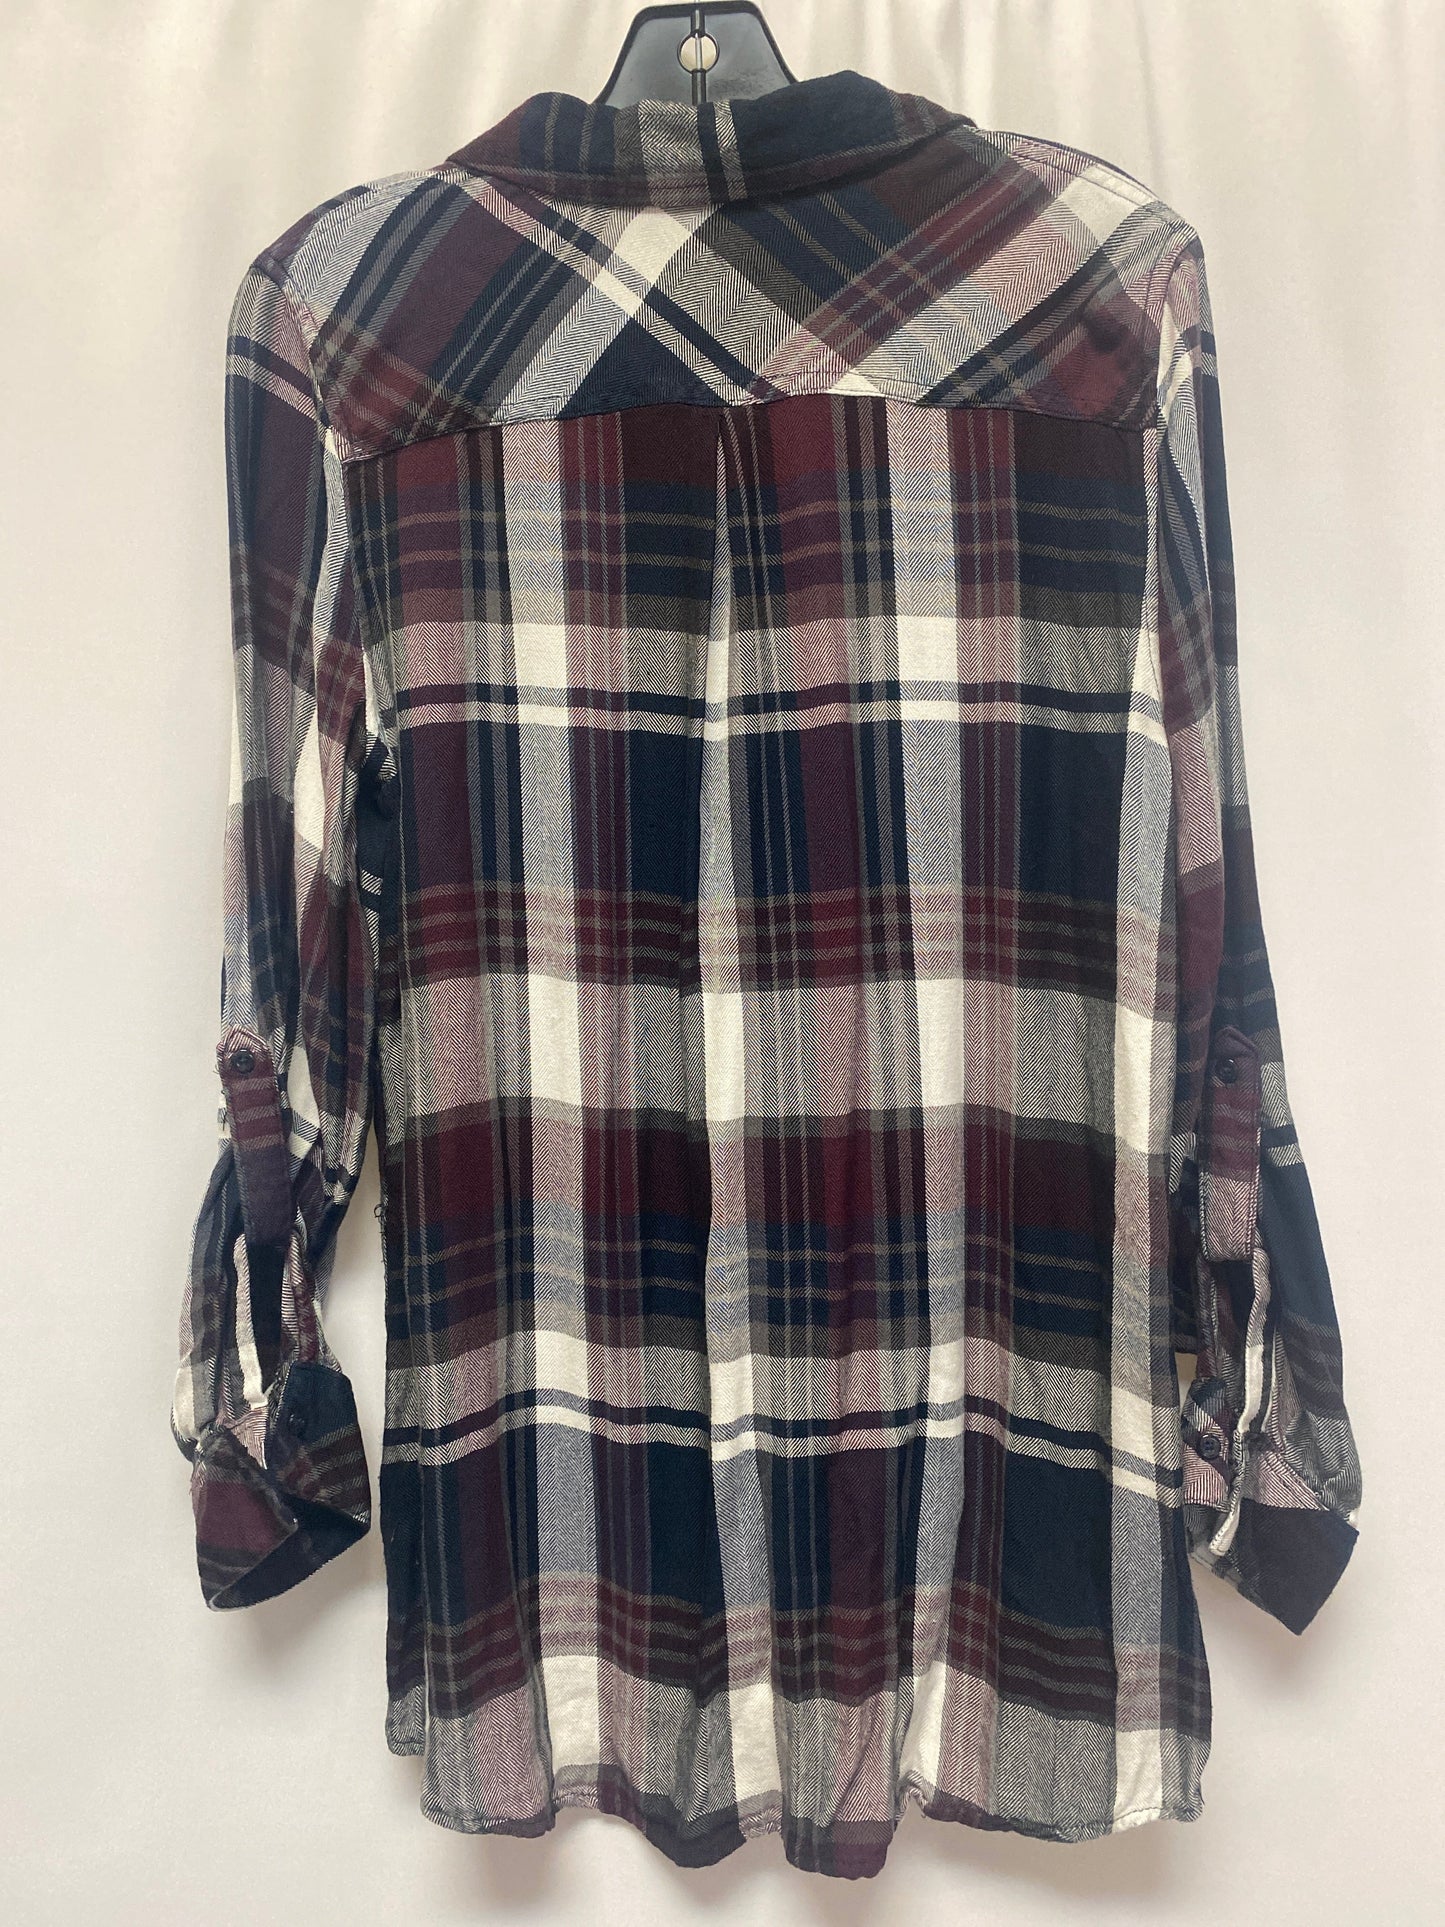 Plaid Pattern Top Long Sleeve Cato, Size L